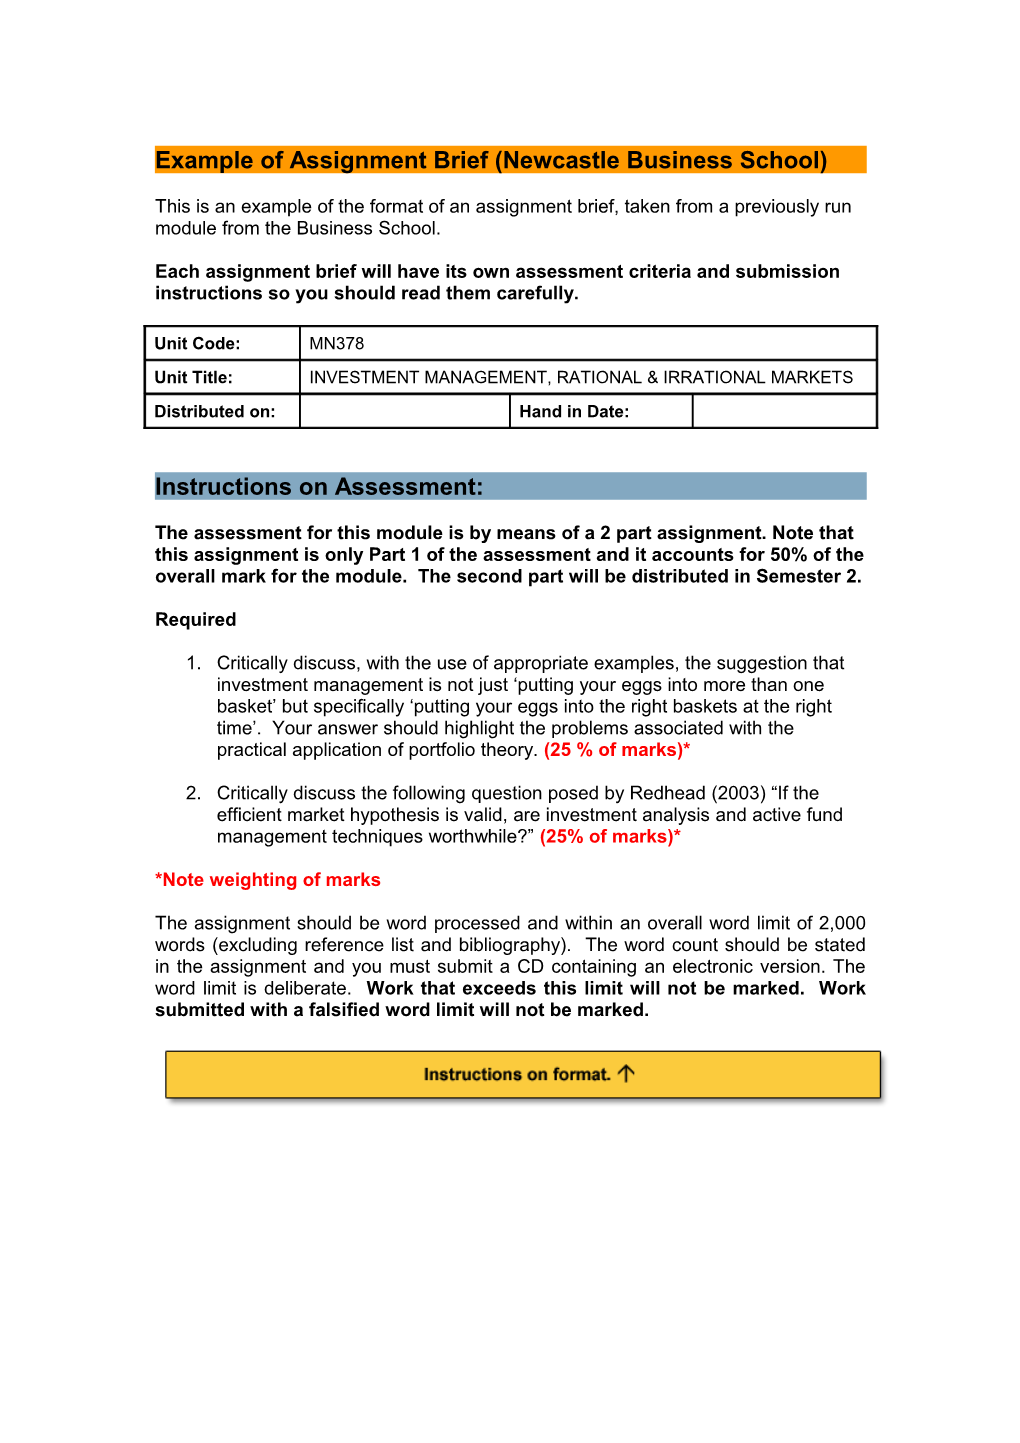 Example of Assignment Brief (Business School)